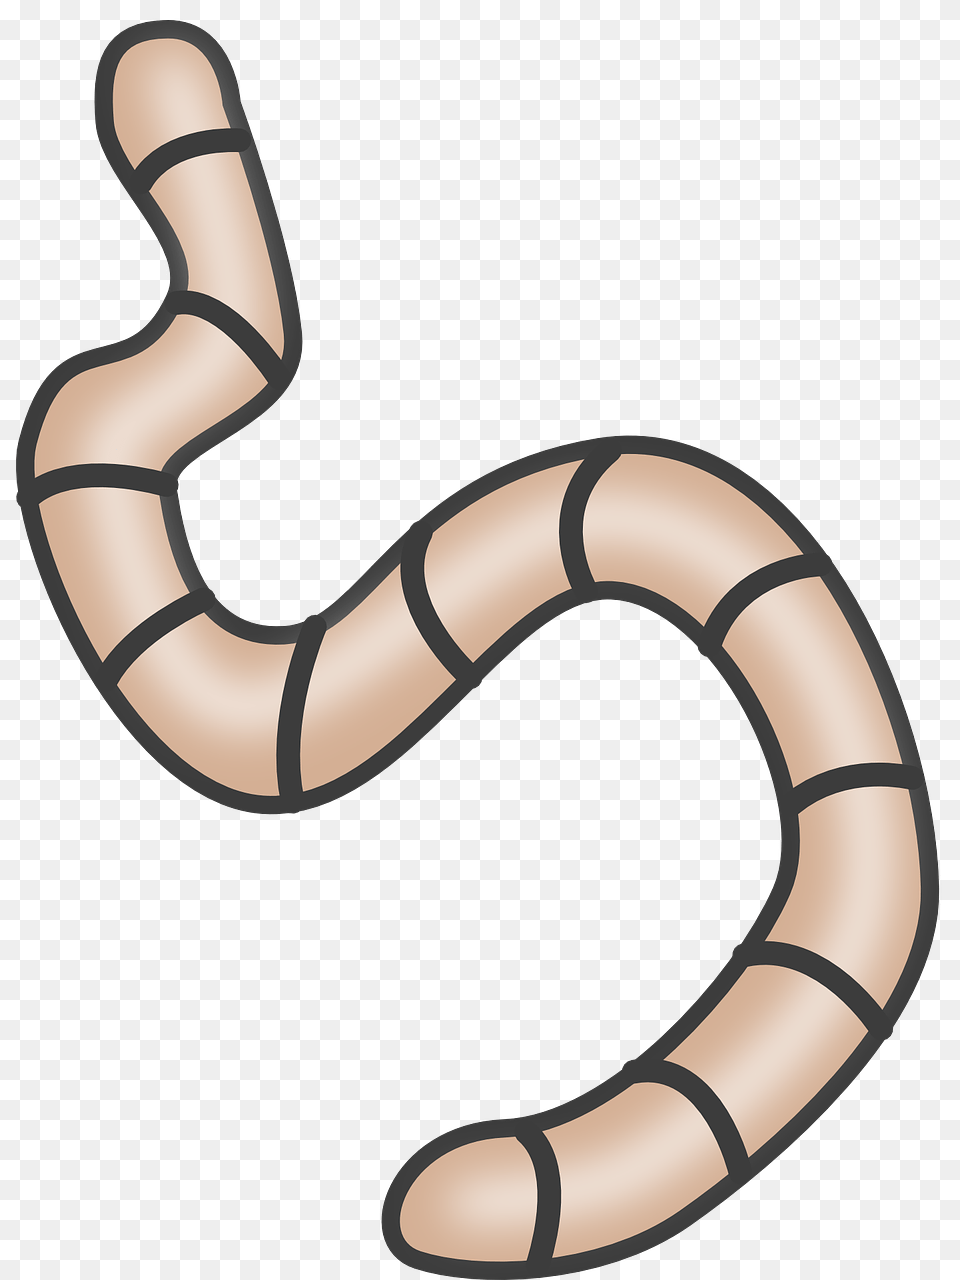 Reptilelineworm Transparent Worm Clipart, Animal, Smoke Pipe Png Image